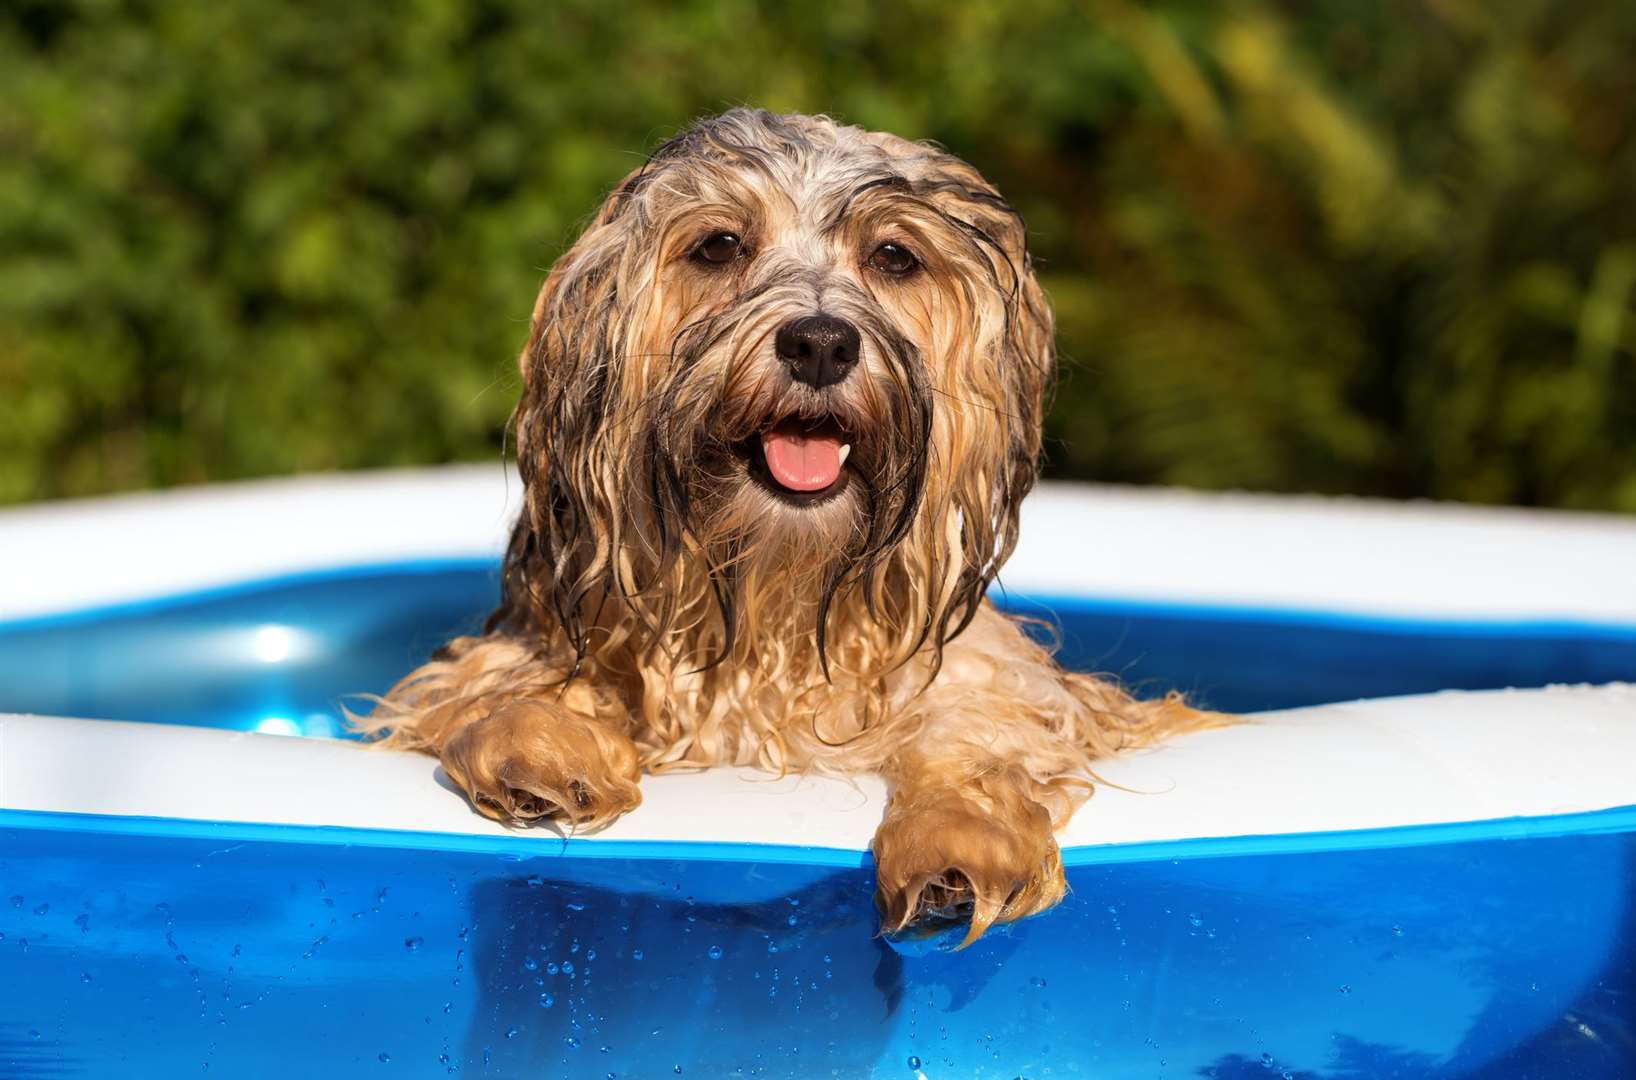 The RSPCA says heatstroke in animals can be a 'silent killer'